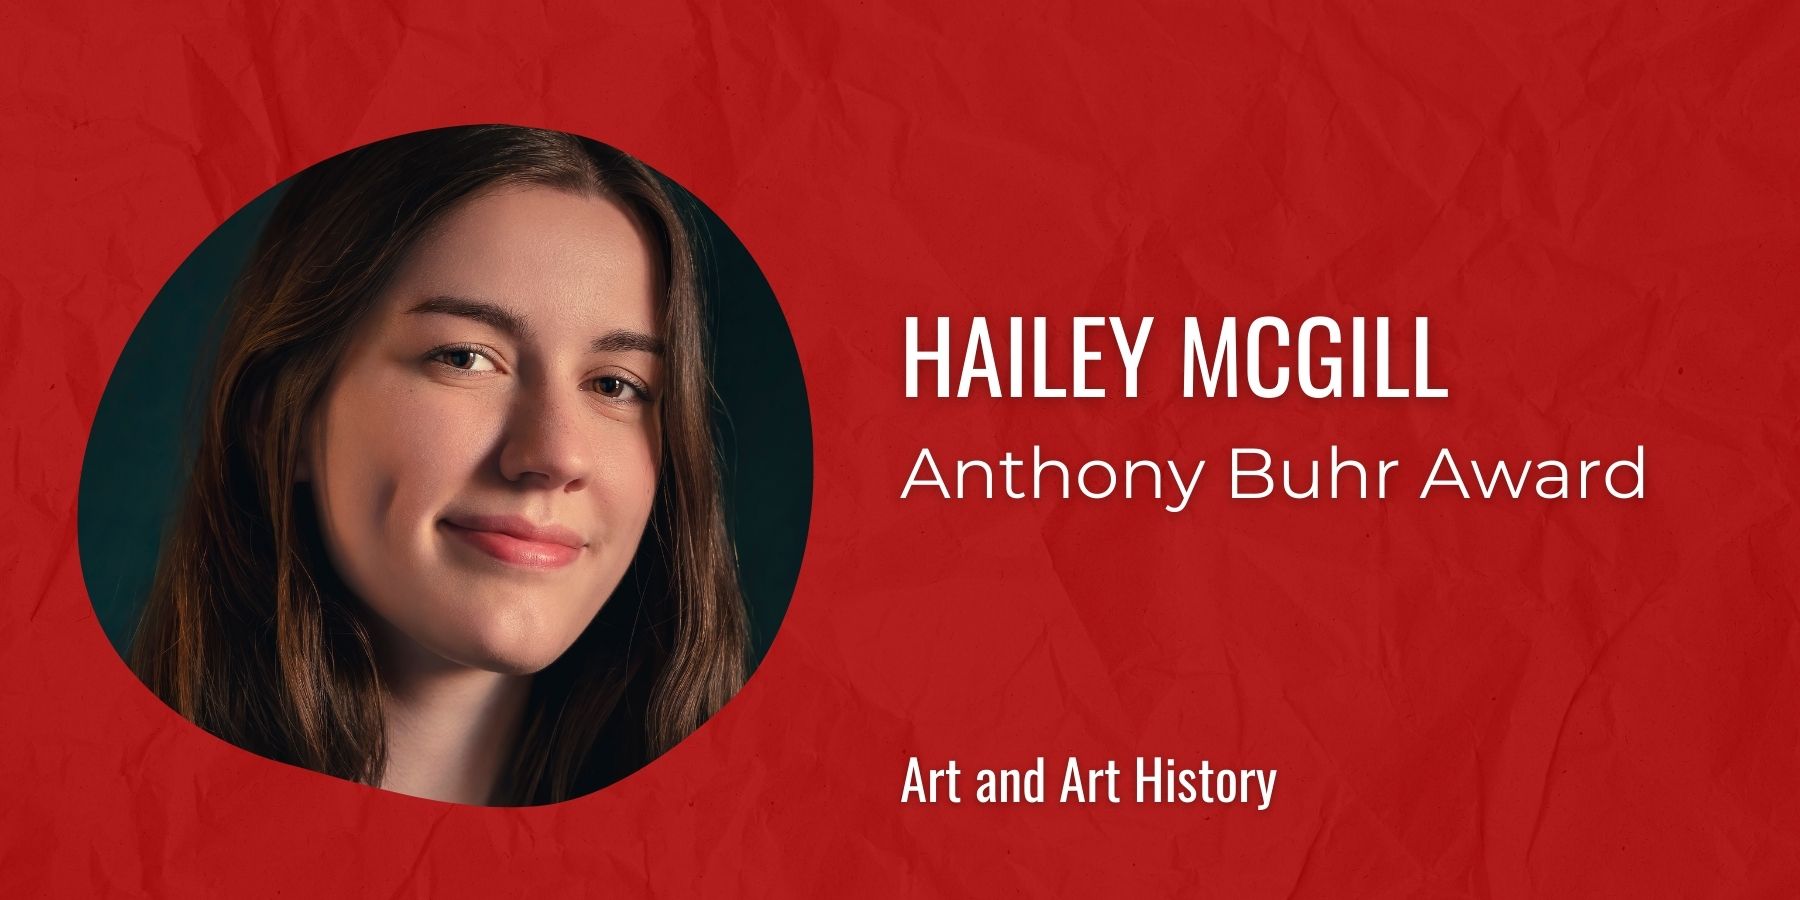 Image of Hailey McGill and text: Anthony Buhr Award, Art and Art History
